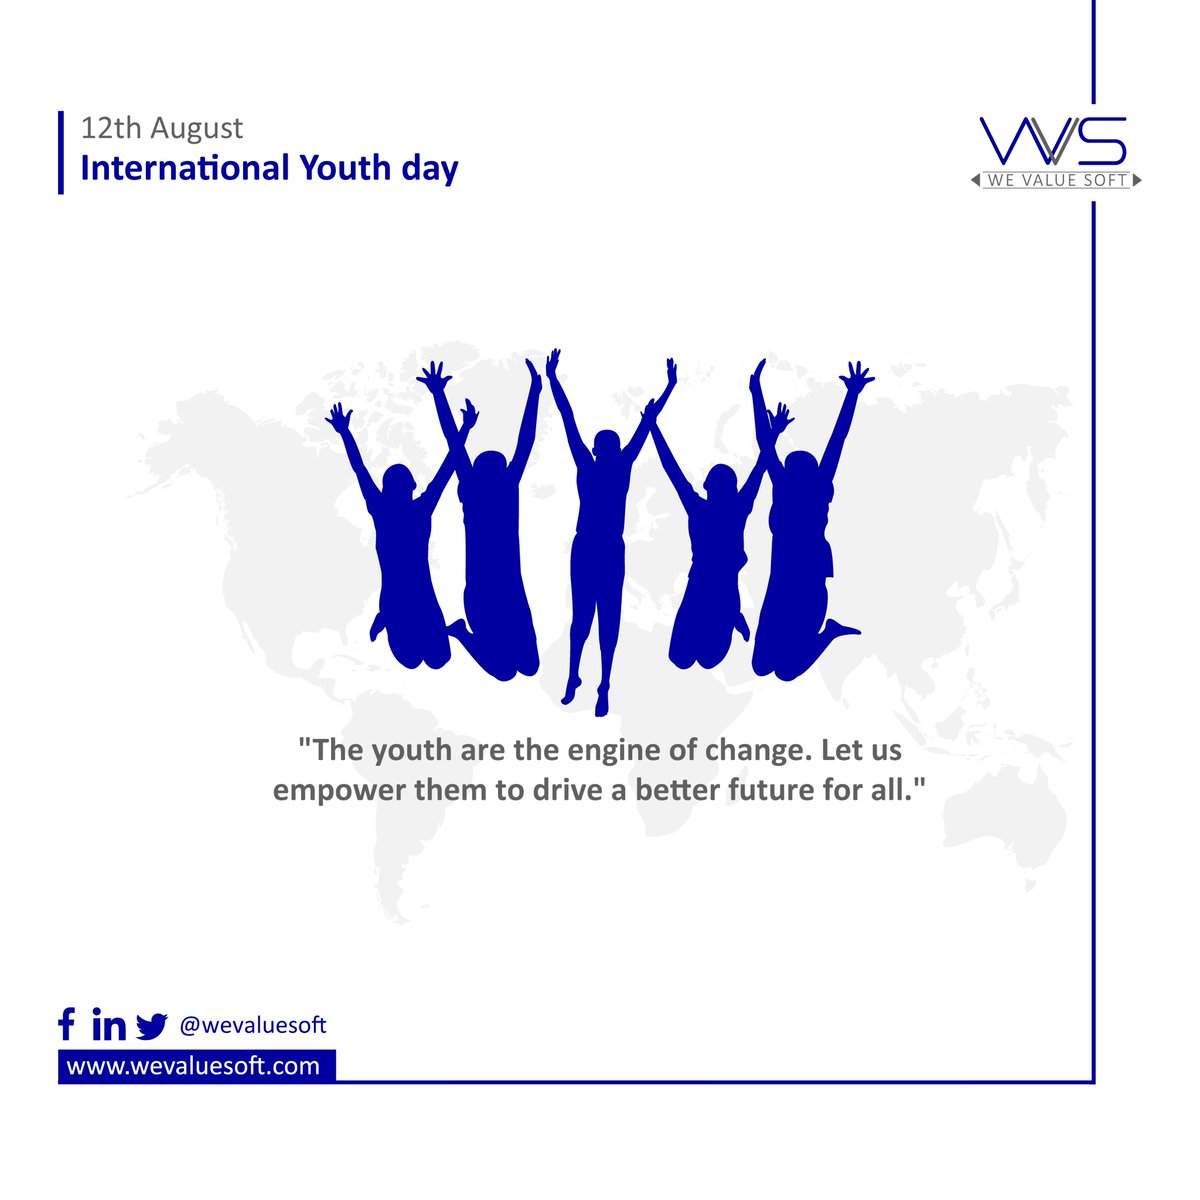 The youth are the hope of our future. Let's celebrate their potential and empower them to make a difference.

Follow Now : @WeValueSoft 
.
.
.
#SoftwareSolutions
#TechInnovation 
#InnovationNation
#TechCommunity
#InternationalYouthDay
#YouthPower
#Changemakers
#EmpowerYoungPeople